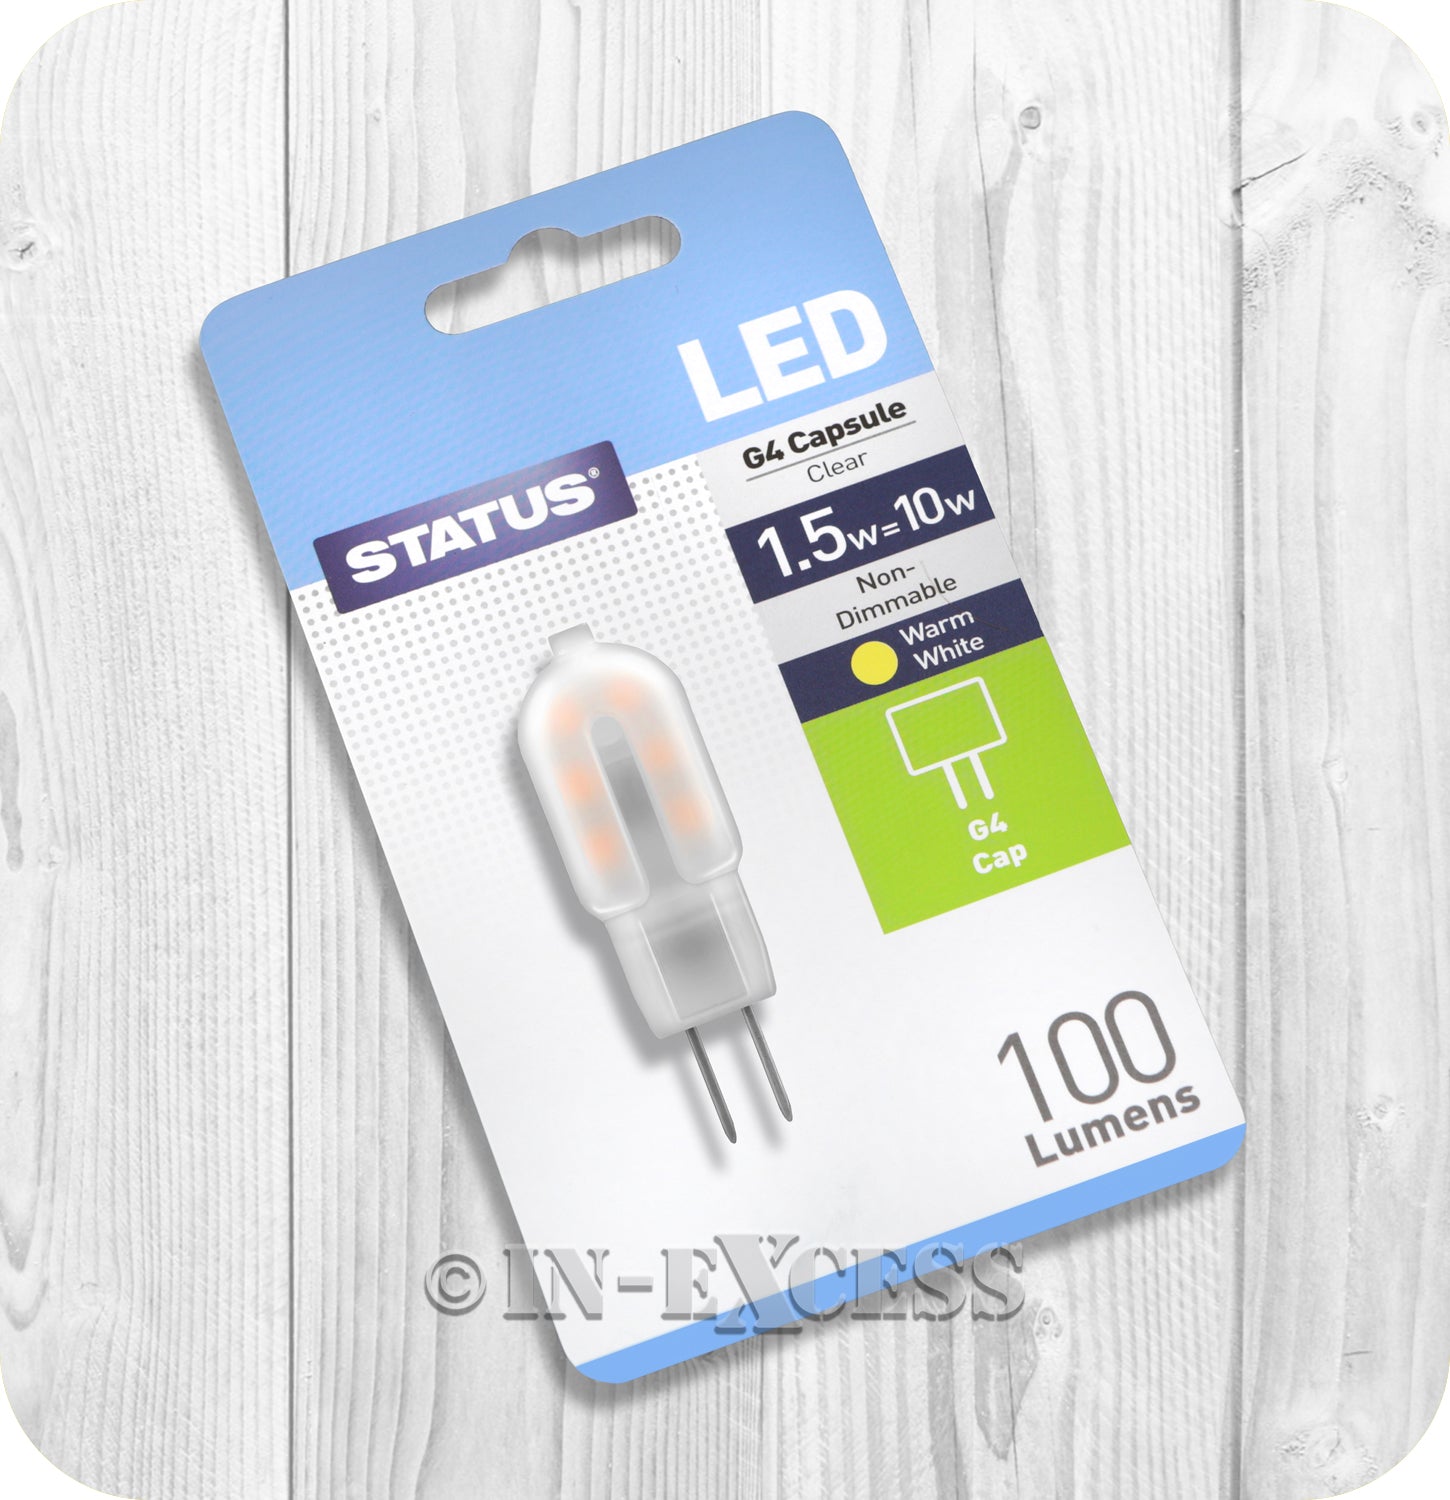 Status LED Non-Dimmable G4 Capsule Bulb 1.5W~10W - Warm White